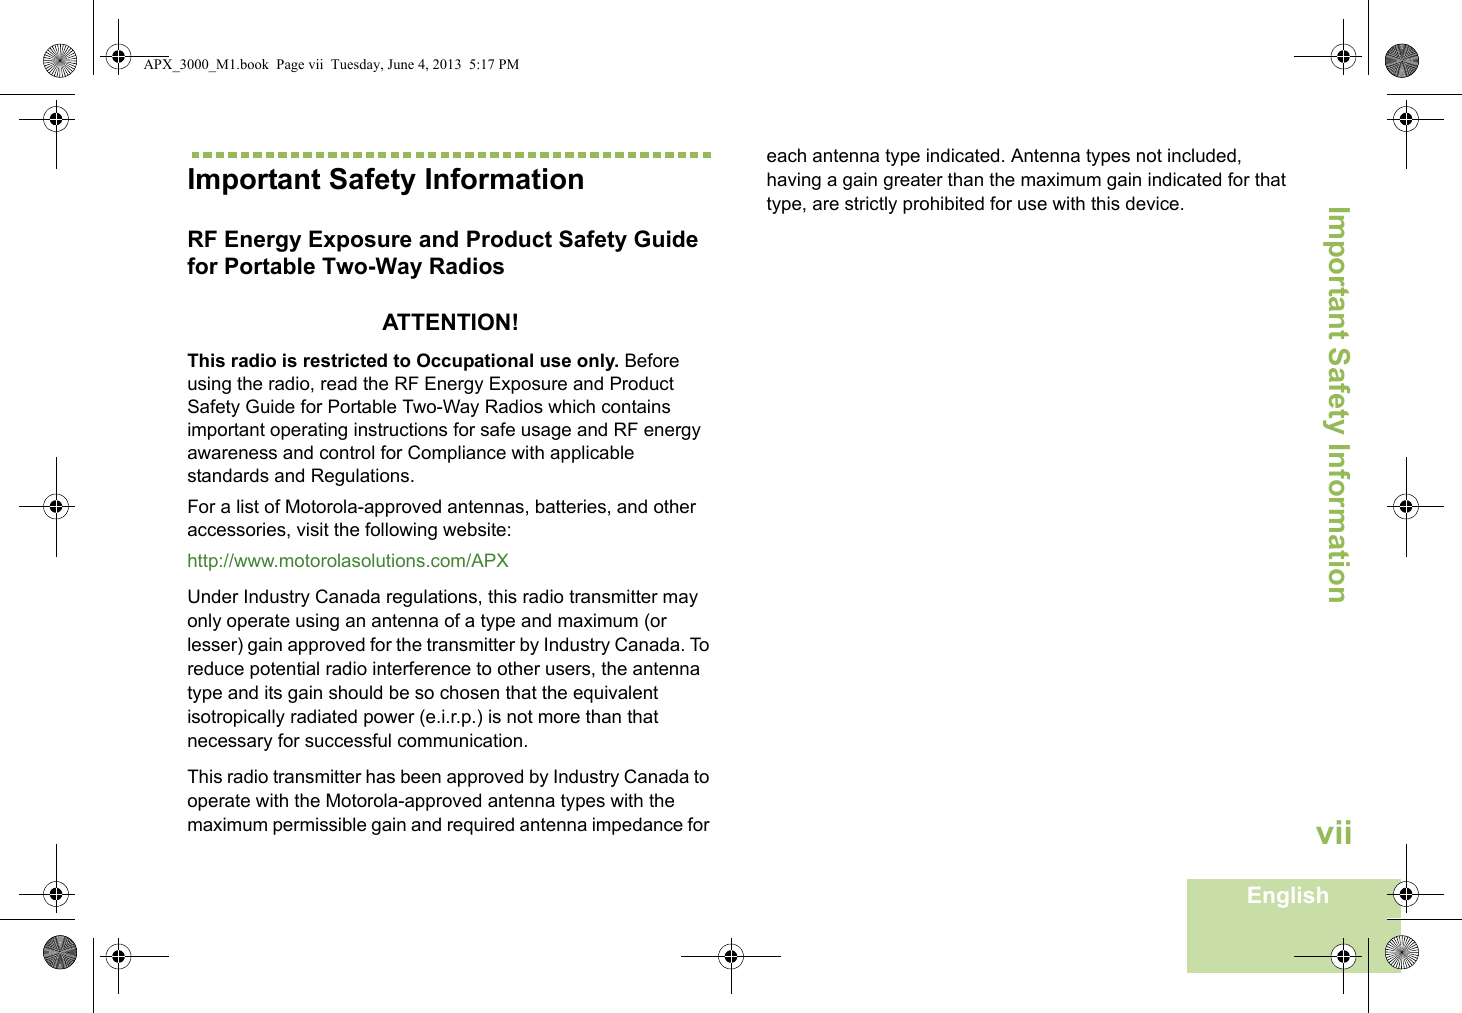 Important Safety InformationEnglishviiImportant Safety InformationRF Energy Exposure and Product Safety Guide for Portable Two-Way RadiosATTENTION! This radio is restricted to Occupational use only. Before using the radio, read the RF Energy Exposure and Product Safety Guide for Portable Two-Way Radios which contains important operating instructions for safe usage and RF energy awareness and control for Compliance with applicable standards and Regulations.For a list of Motorola-approved antennas, batteries, and other accessories, visit the following website: http://www.motorolasolutions.com/APX Under Industry Canada regulations, this radio transmitter may only operate using an antenna of a type and maximum (or lesser) gain approved for the transmitter by Industry Canada. To reduce potential radio interference to other users, the antenna type and its gain should be so chosen that the equivalent isotropically radiated power (e.i.r.p.) is not more than that necessary for successful communication.This radio transmitter has been approved by Industry Canada to operate with the Motorola-approved antenna types with the maximum permissible gain and required antenna impedance for each antenna type indicated. Antenna types not included, having a gain greater than the maximum gain indicated for that type, are strictly prohibited for use with this device.APX_3000_M1.book  Page vii  Tuesday, June 4, 2013  5:17 PM